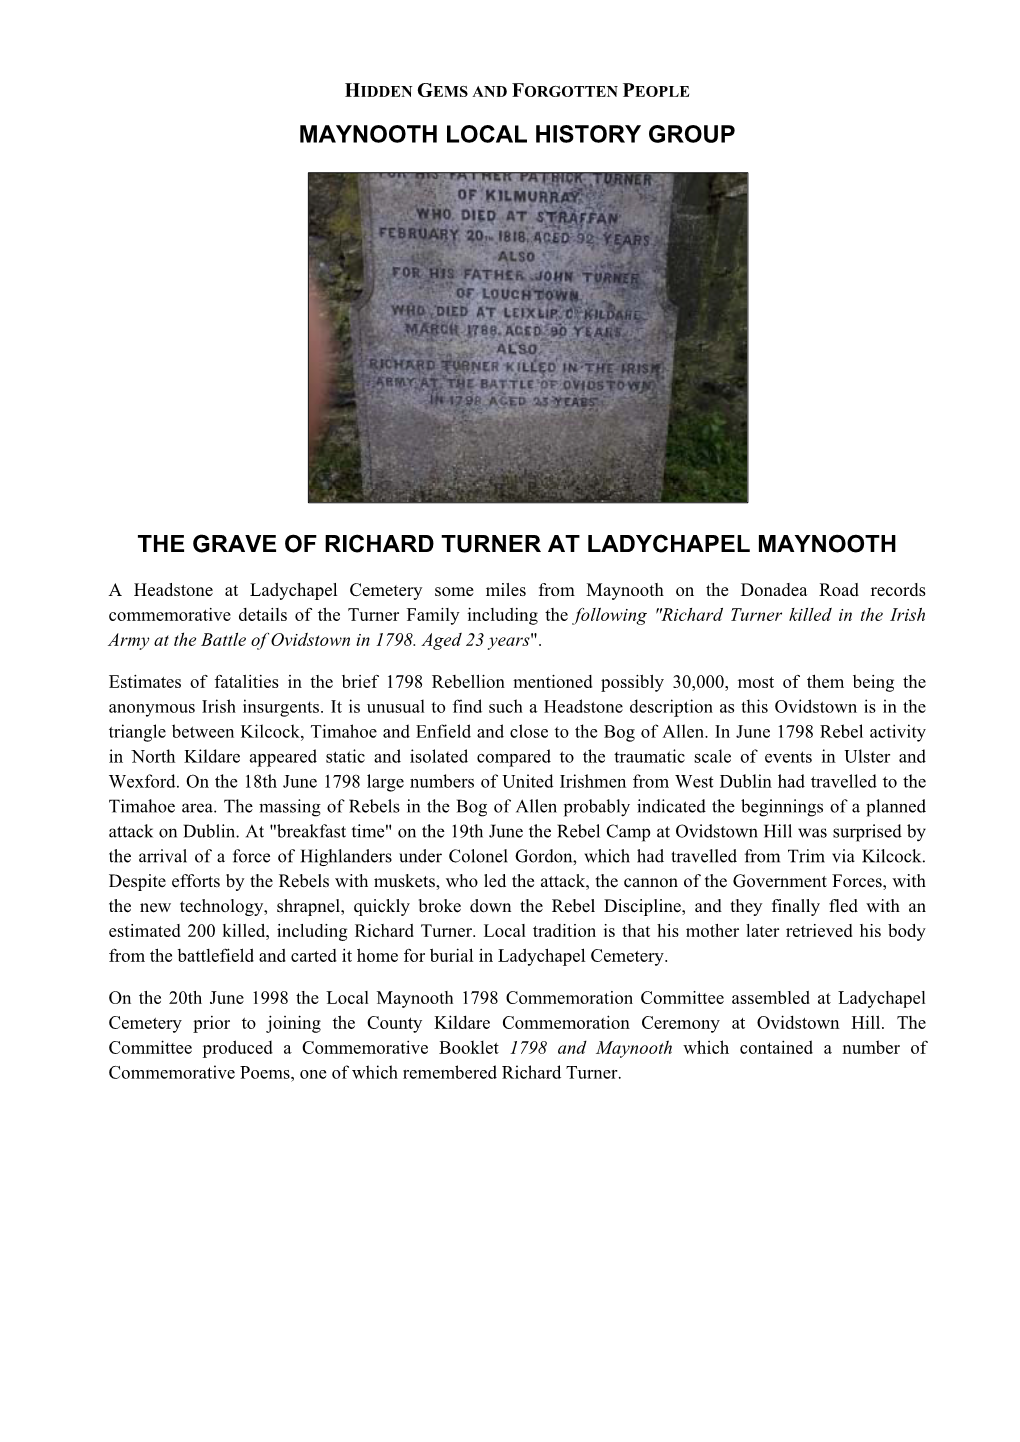 The Grave of Richard Turner at Ladychapel Maynooth